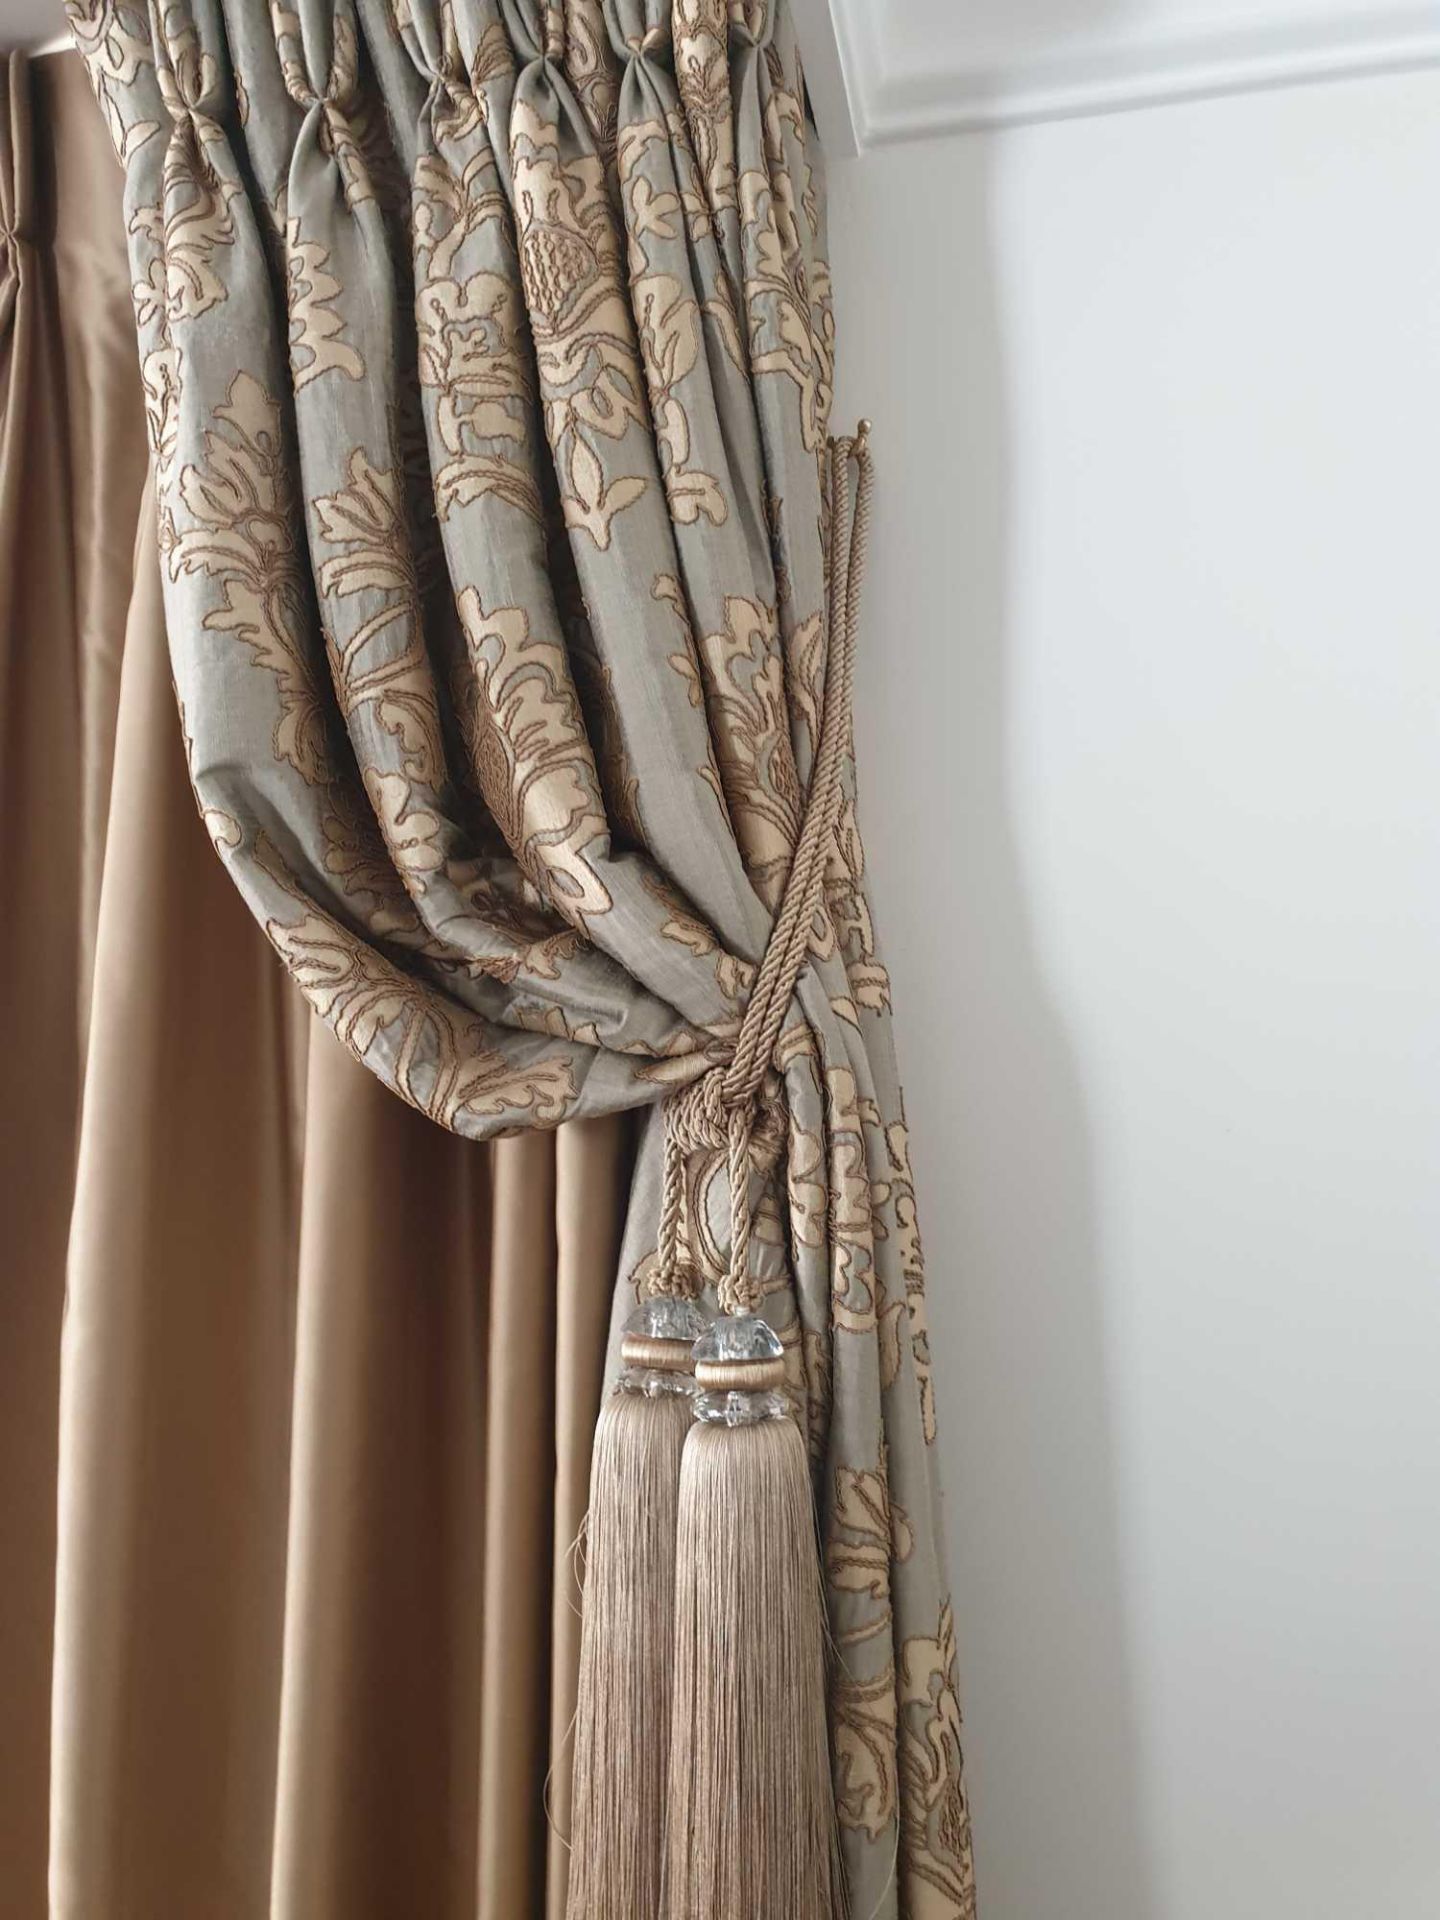 A Pair Of Gold Silk Drapes With Crystal Bead Trim And Jabots With Tie Backs Span 150 x 260cm (Room - Bild 2 aus 2